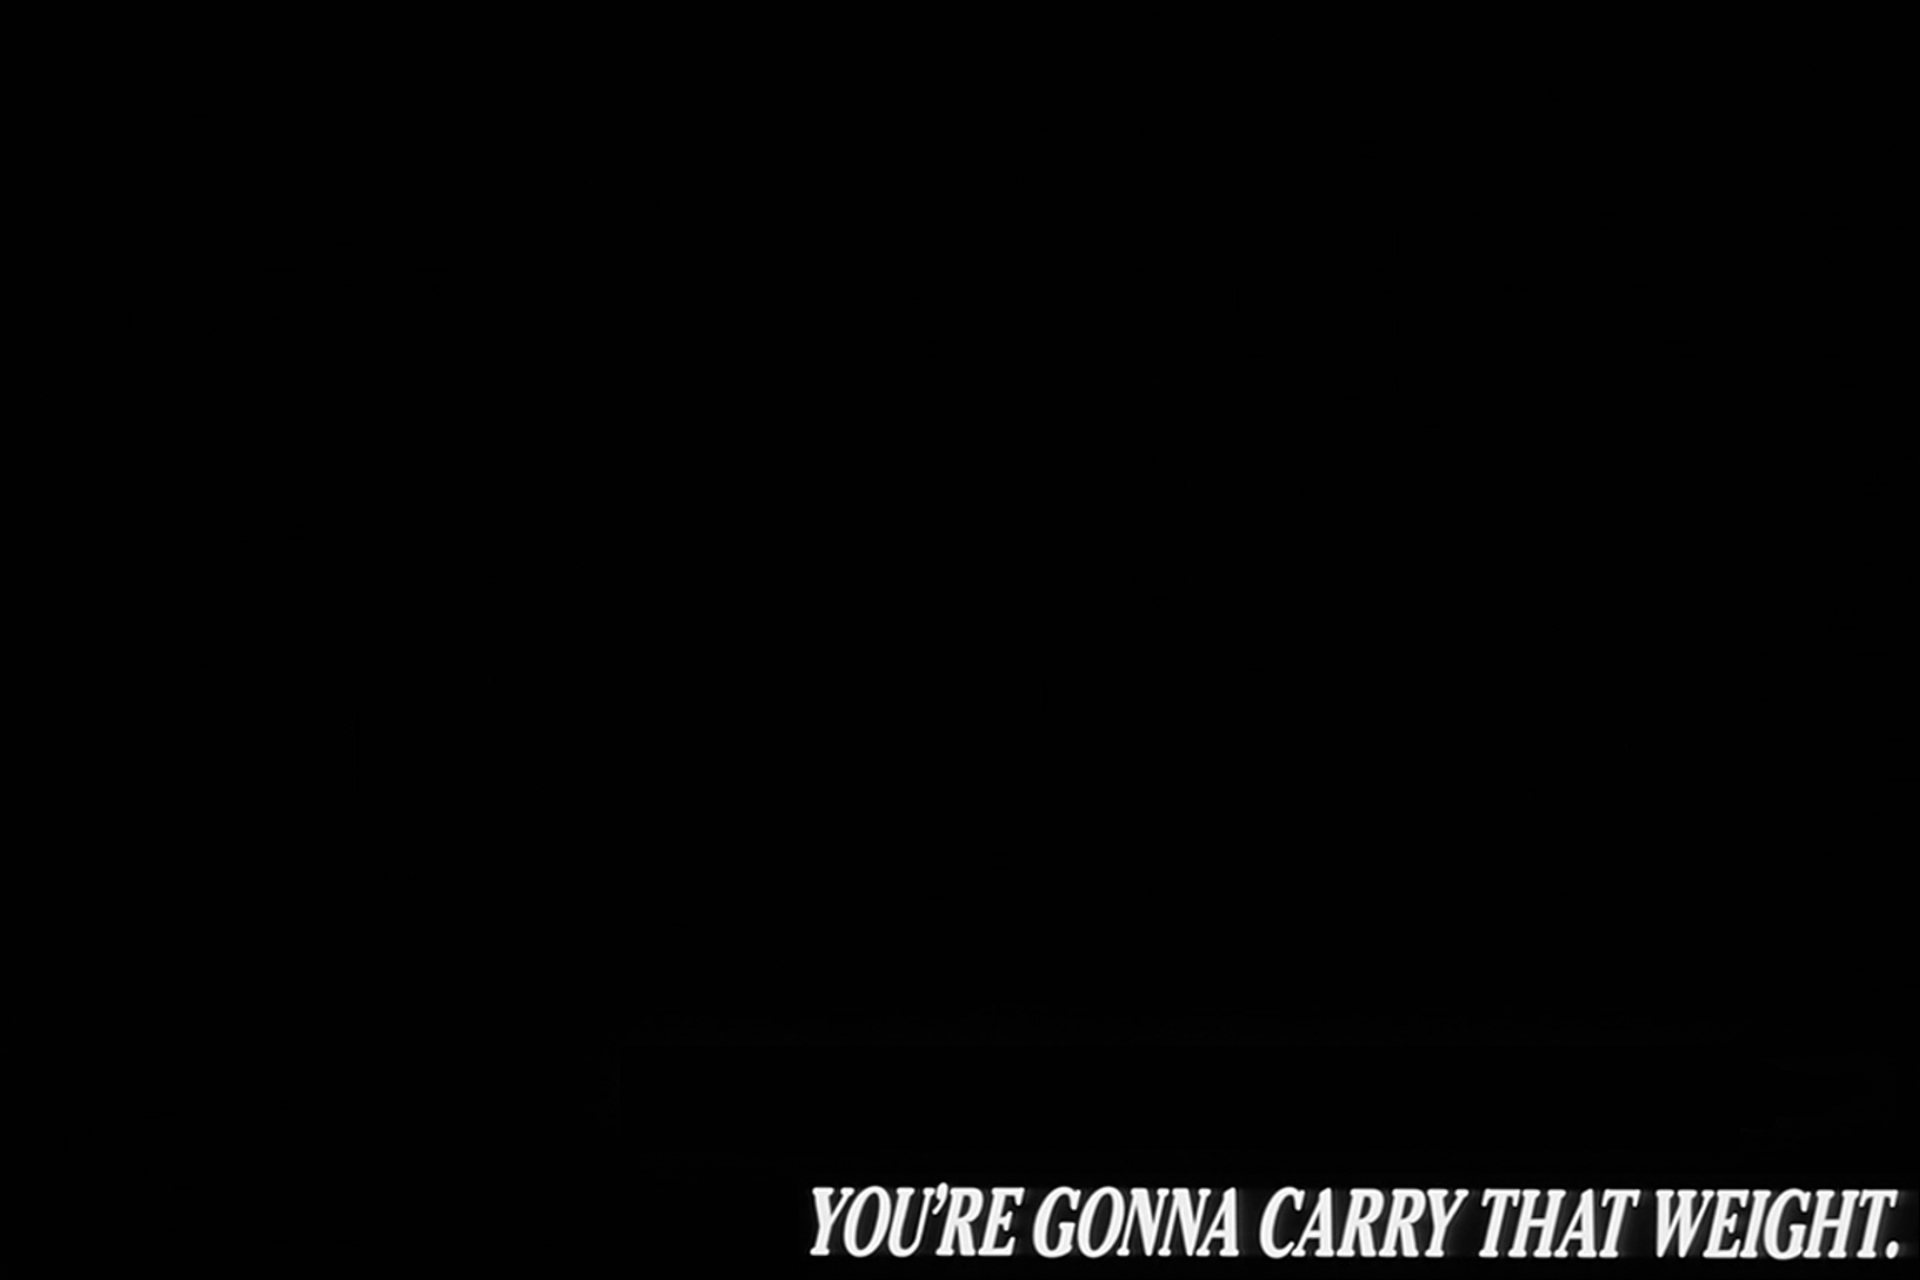 Anime 1920x1280 Cowboy Bebop you're gonna carry that weight minimalism The Beatles quote